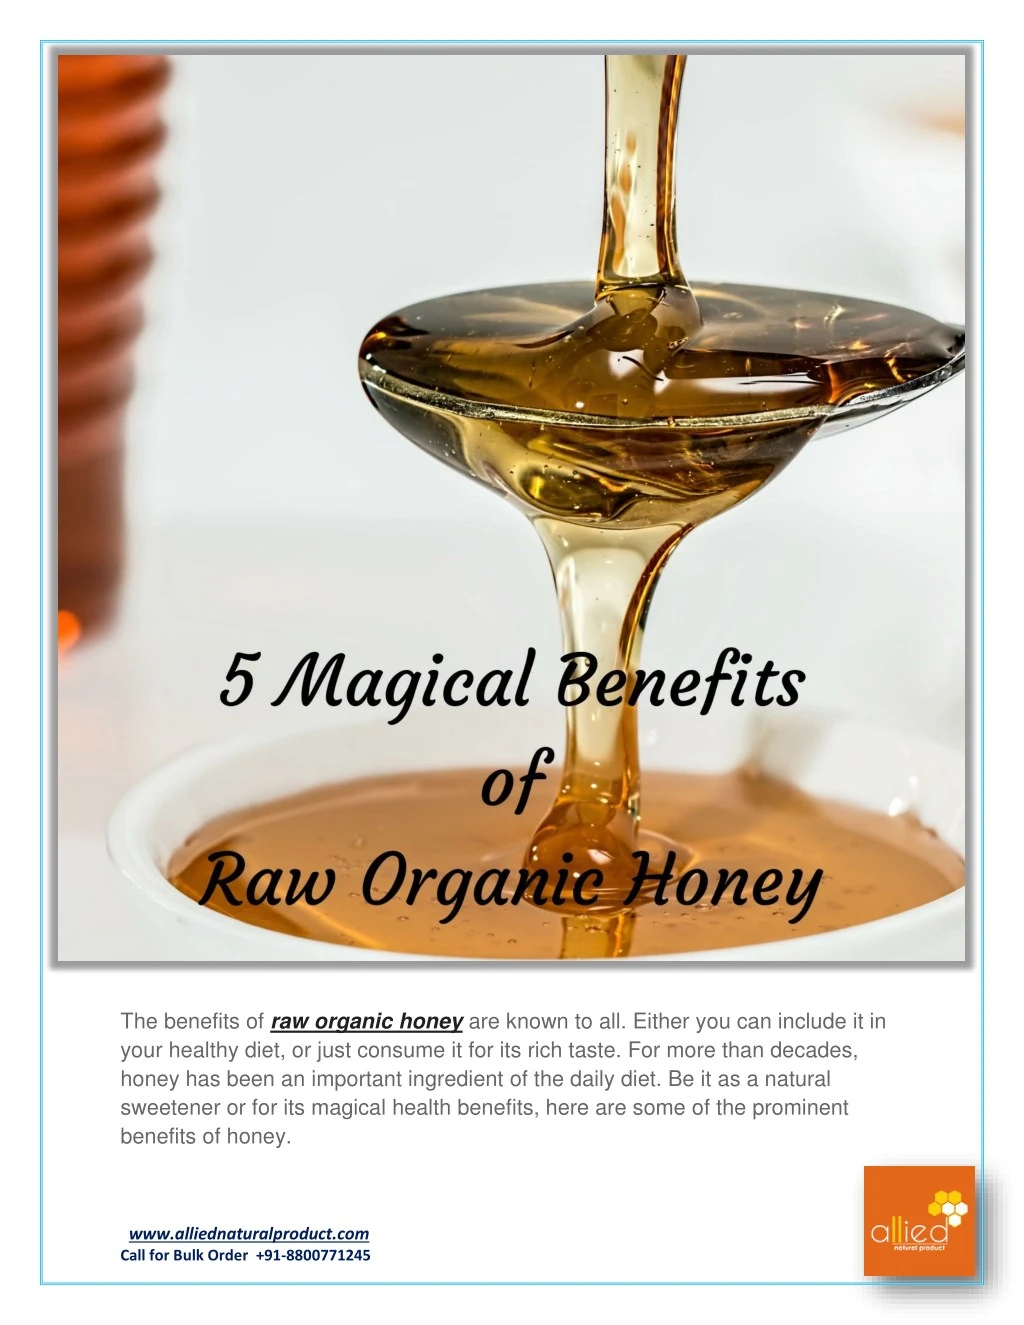 the benefits of raw organic honey are known